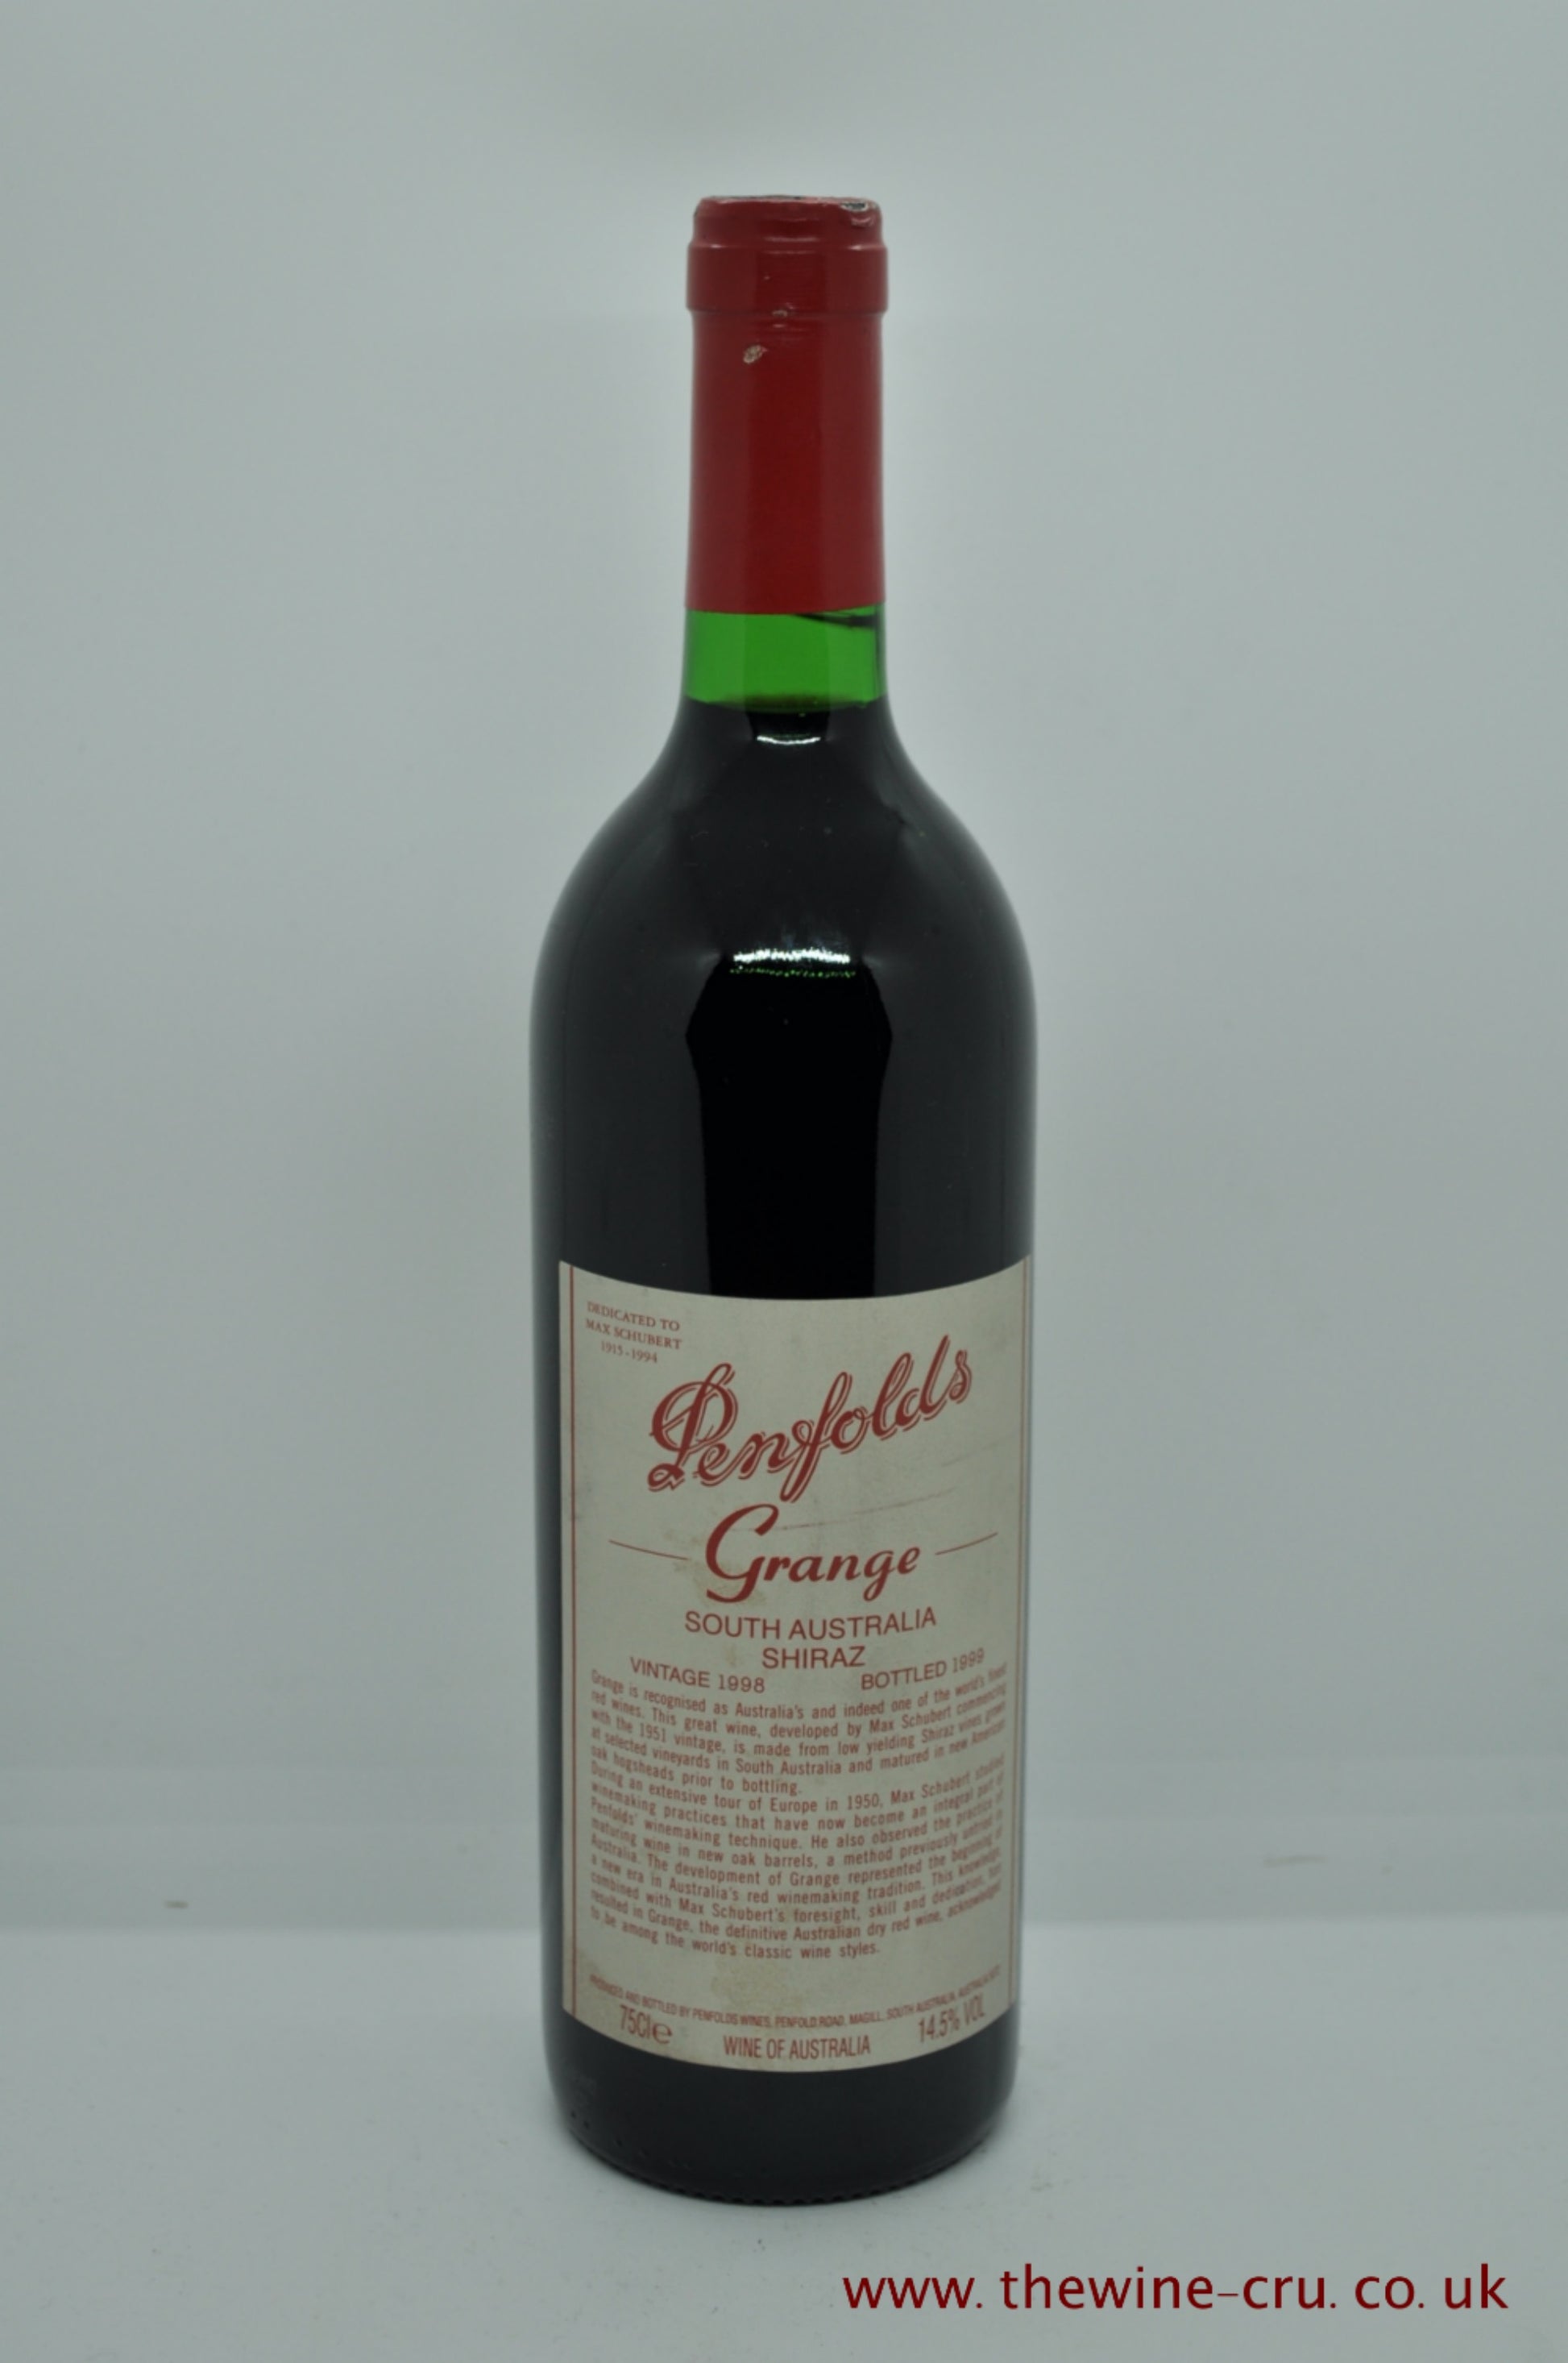 1998 vintage red wine. Penfolds Grange, Australia. The bottle is in good condition with the wine level being just in the neck. Immediate delivery. free local delivery. Gift wrapping available.